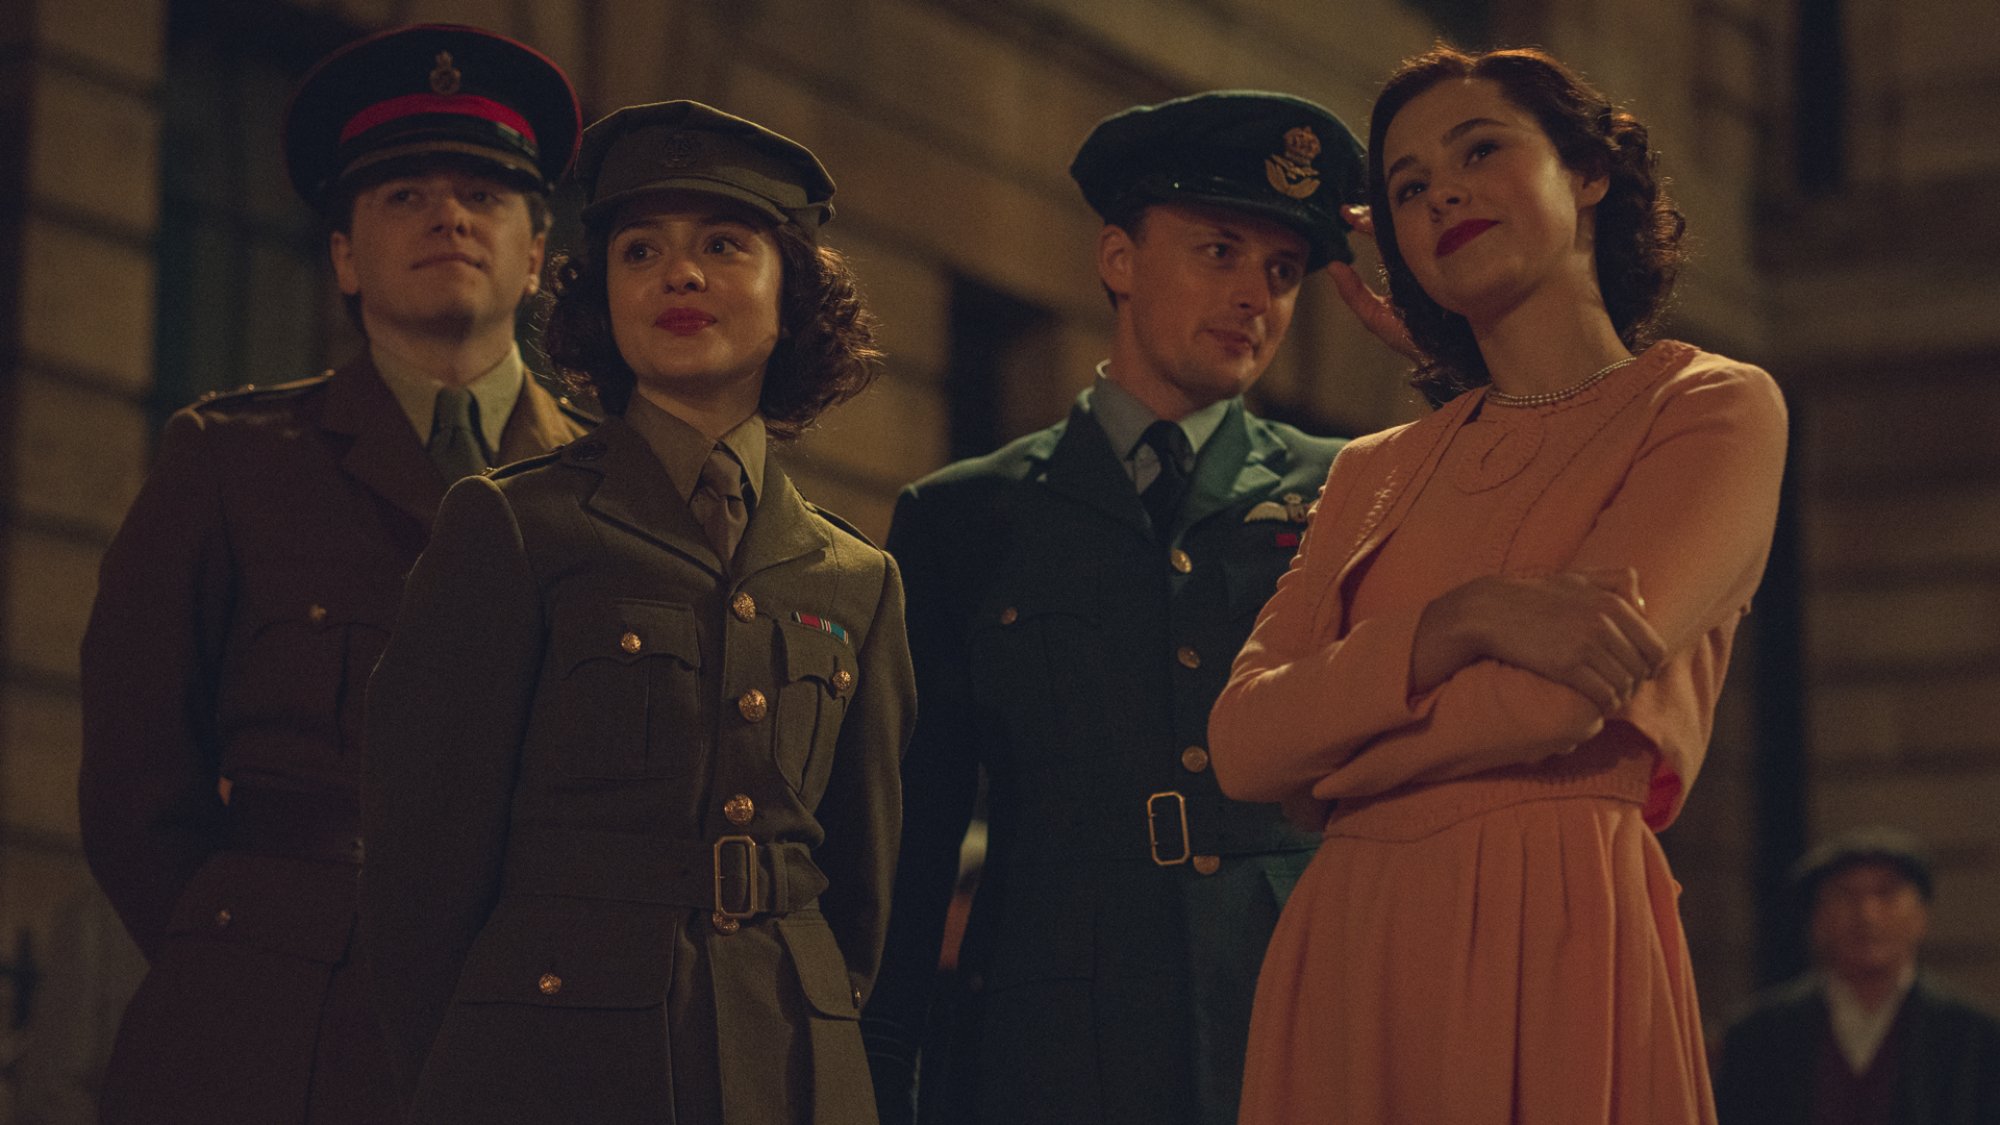 Two young girls and boys in '40s military and evening wear stand together at night